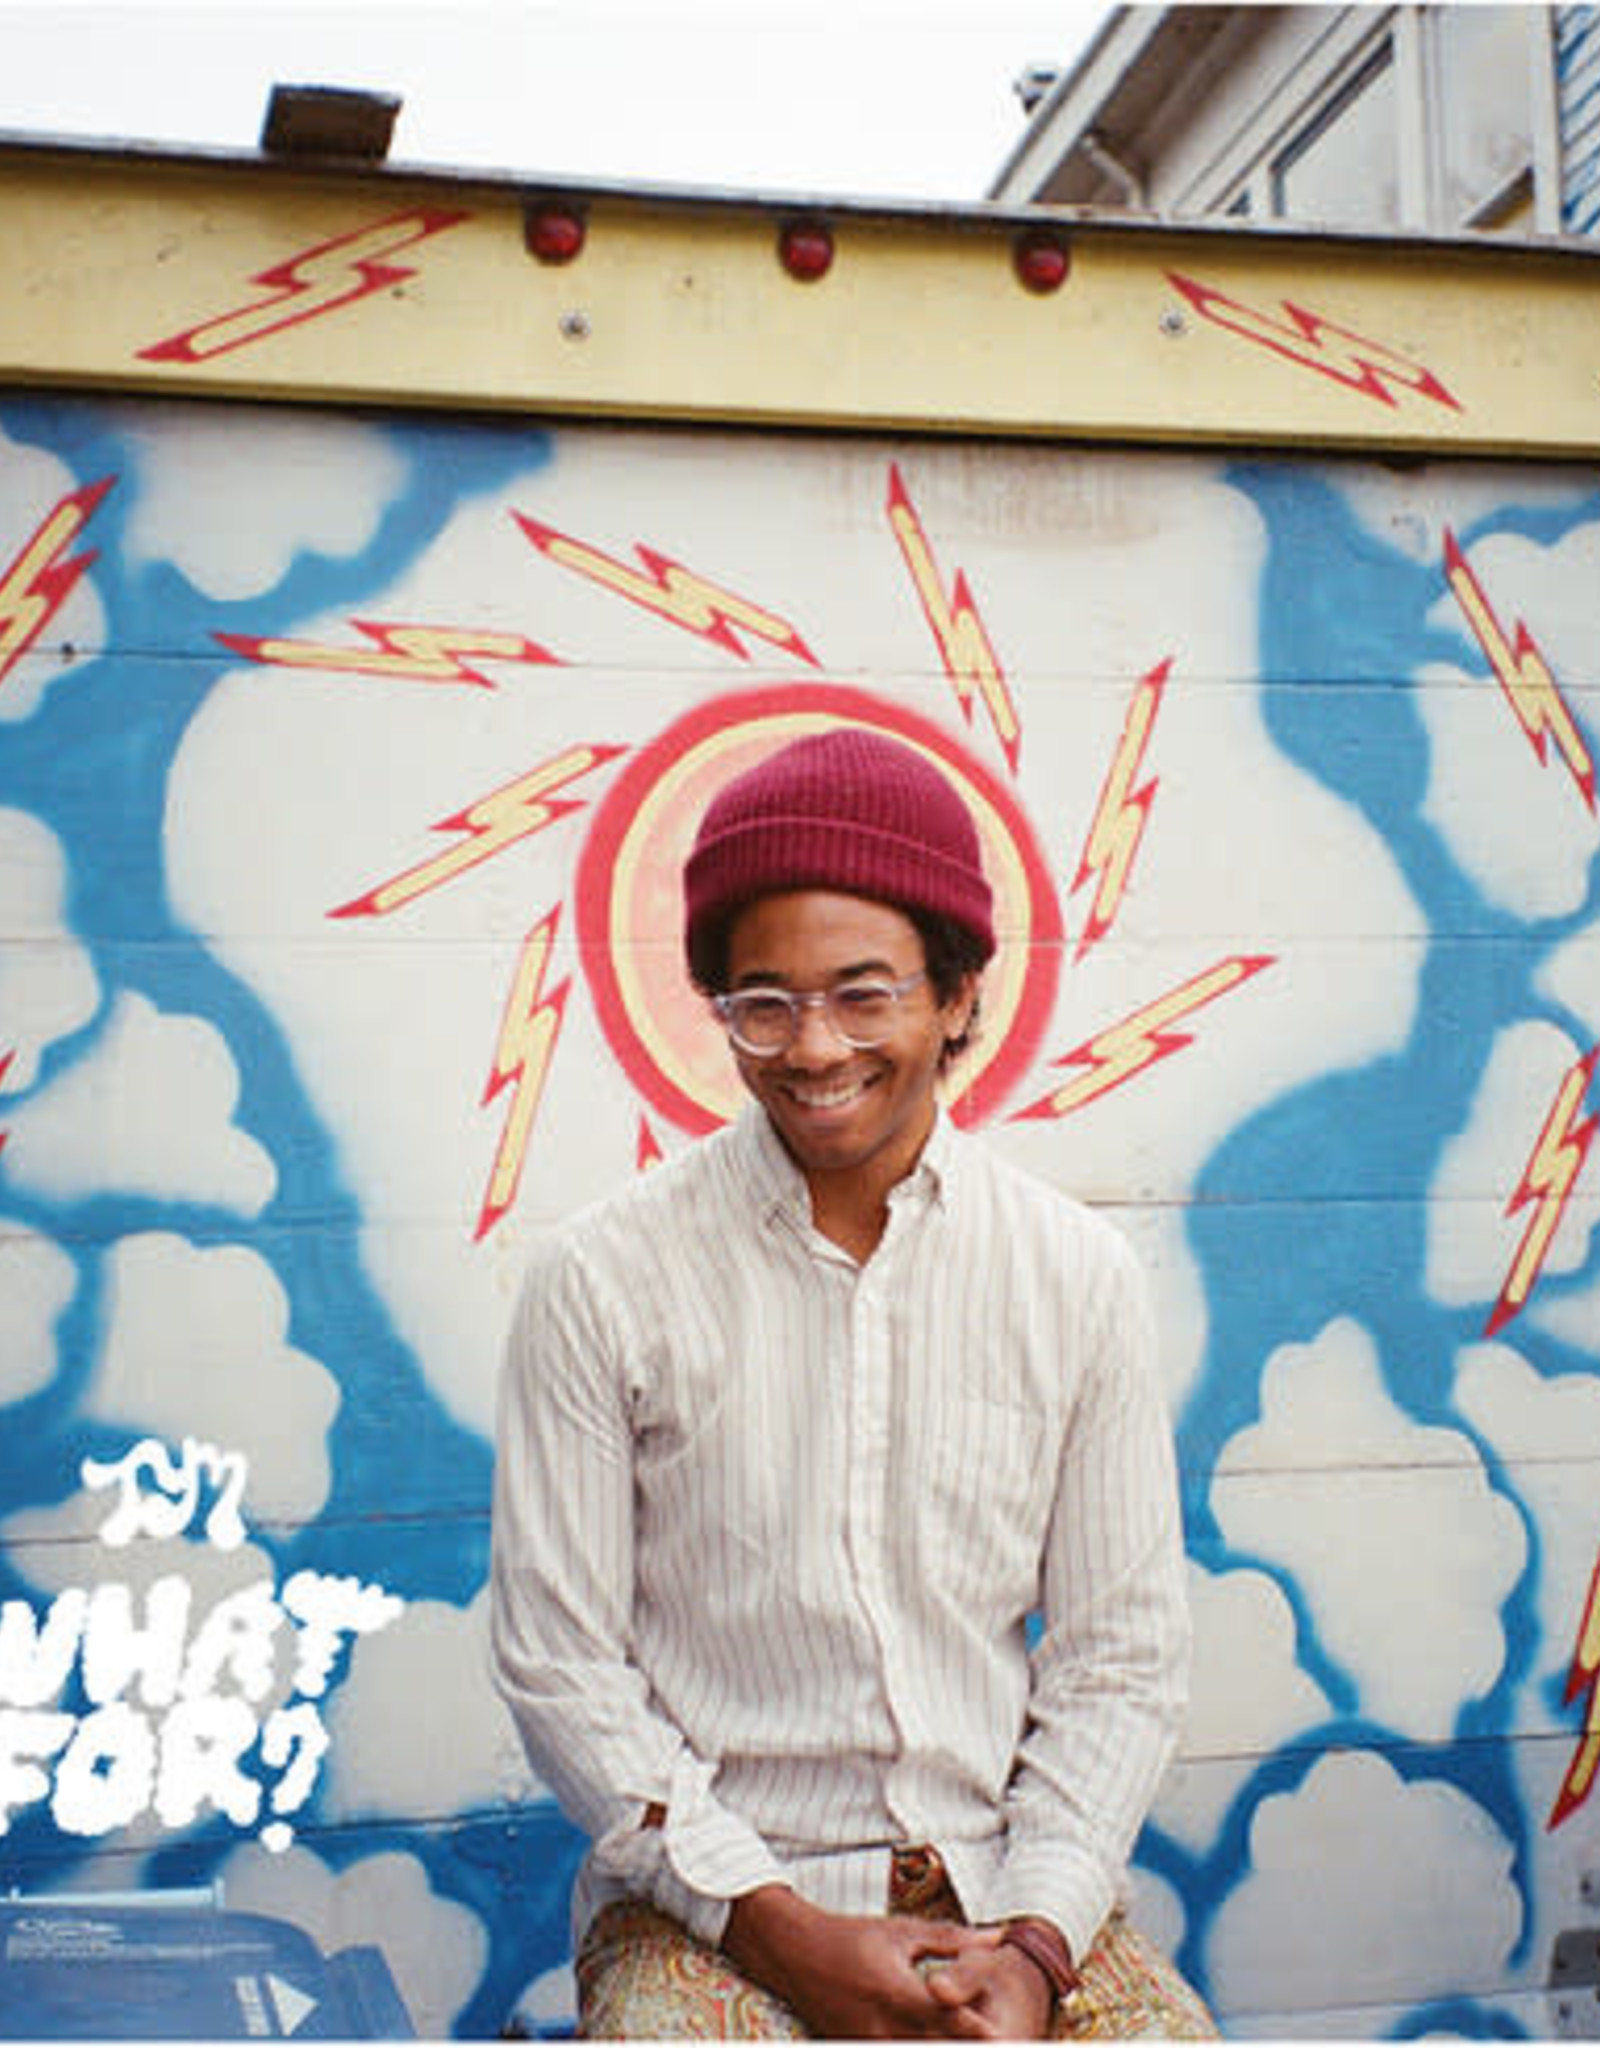 Toro Y Moi - What For?